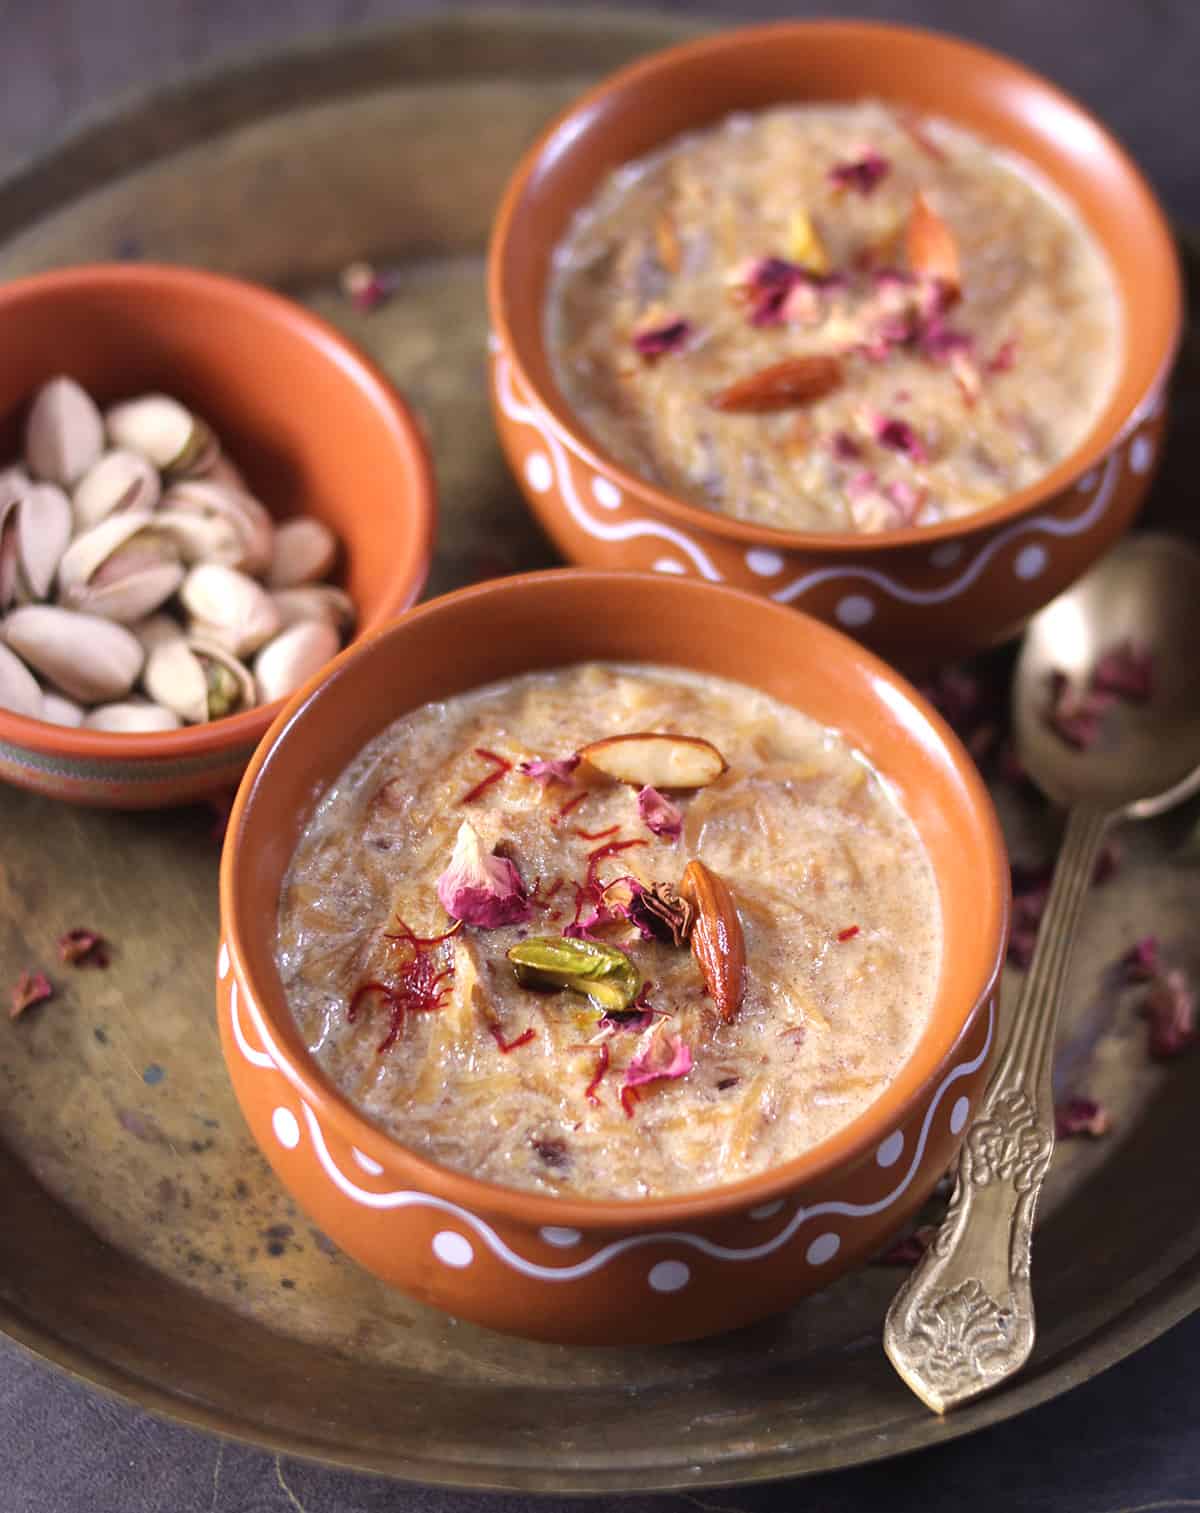 Sheer Khurma dessert garnished with rose, dried fruits and nuts, served warm in bowl. 